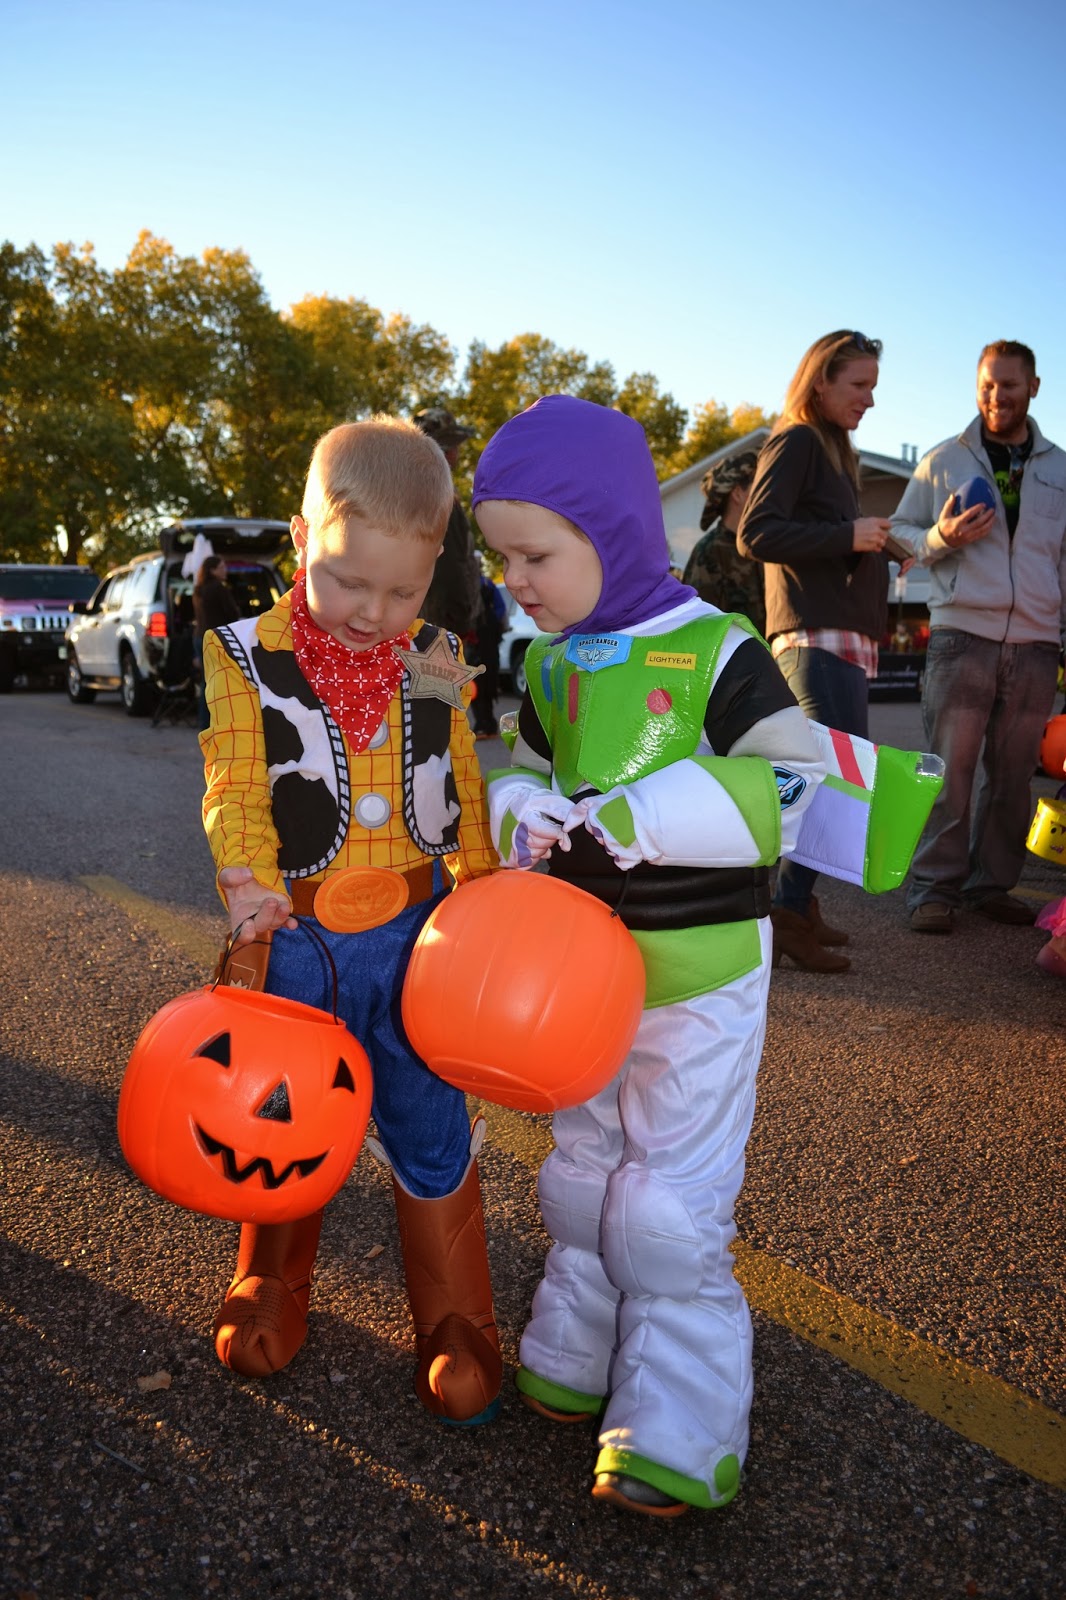 Halloween Meets Toy Story | Building Our Story